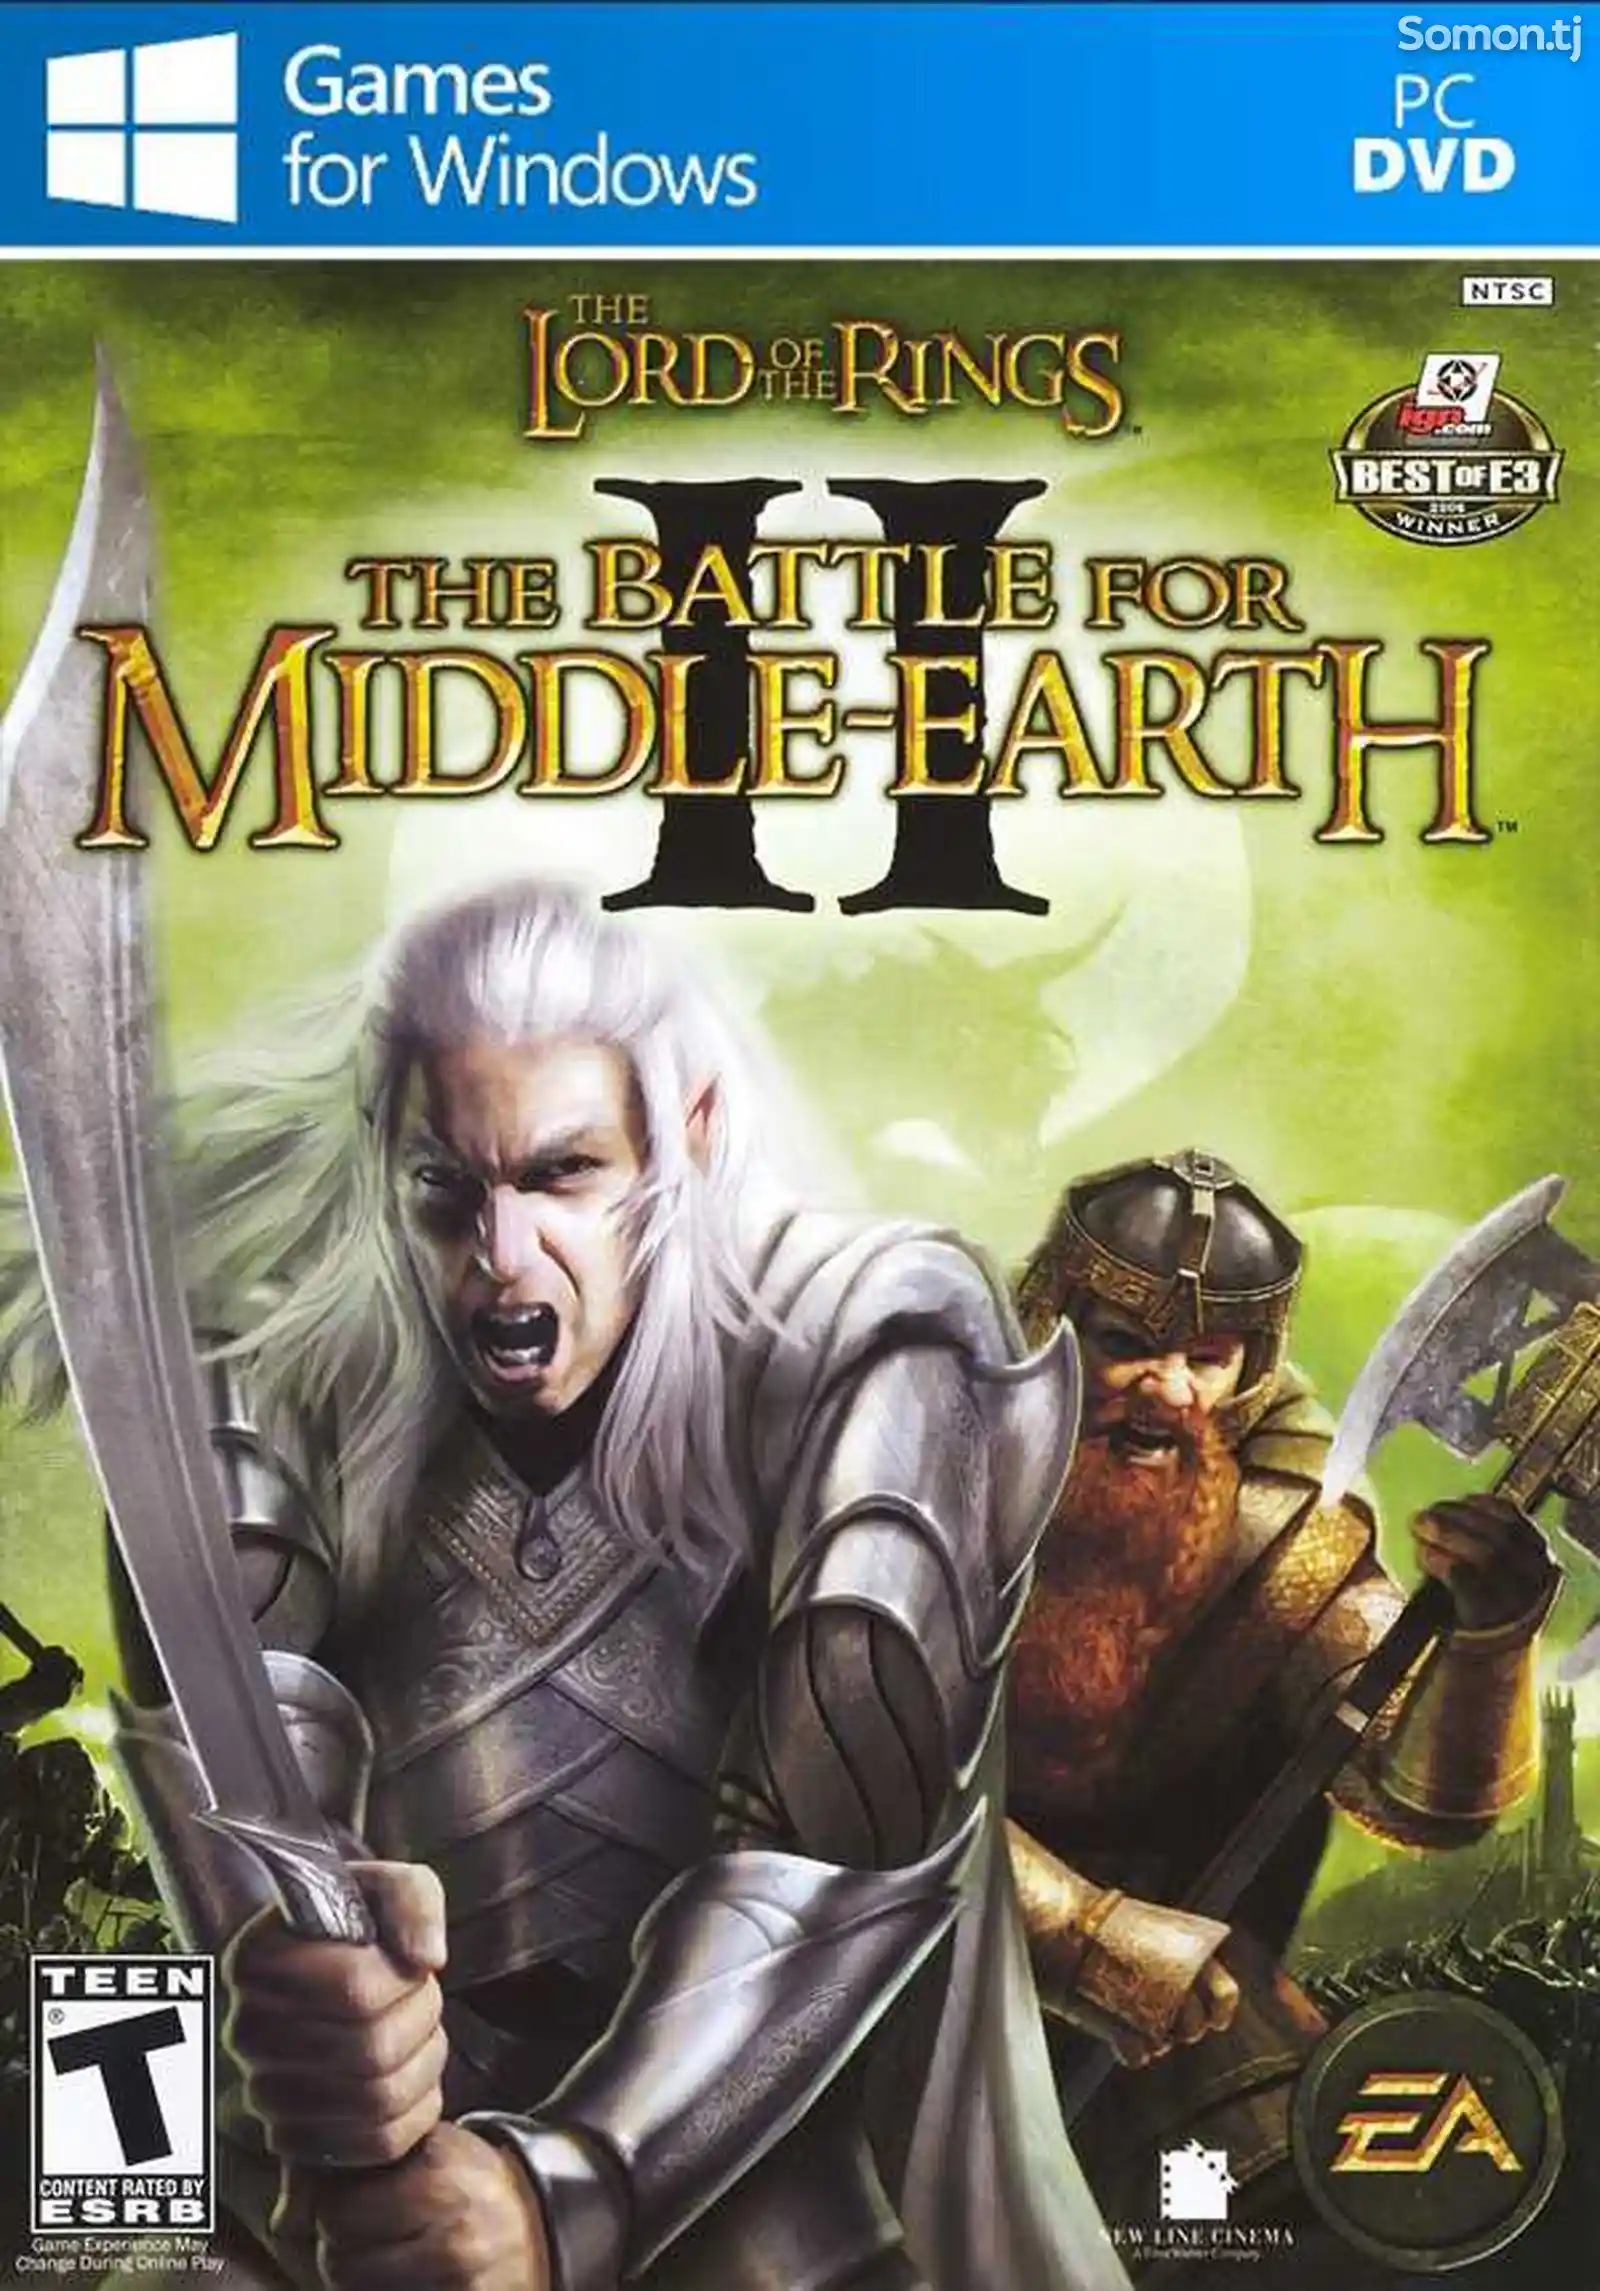 Игра The lord of the rings the battle for middle-earth 2 для компьютера-пк-pc-1